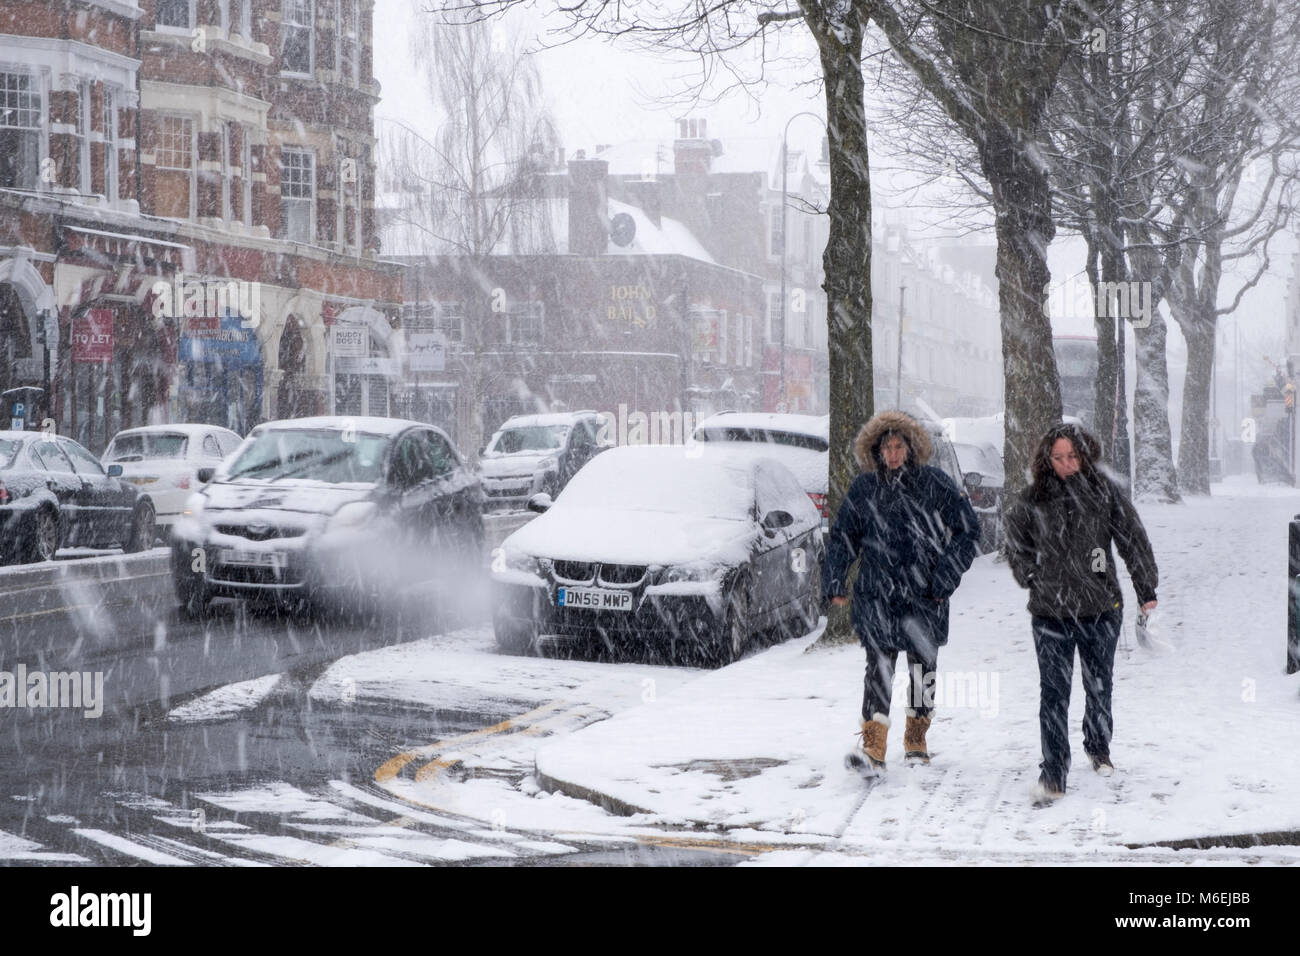 The 'Beast from the East' severe cold weather and snow end of February and beginning of March 2018 Stock Photo